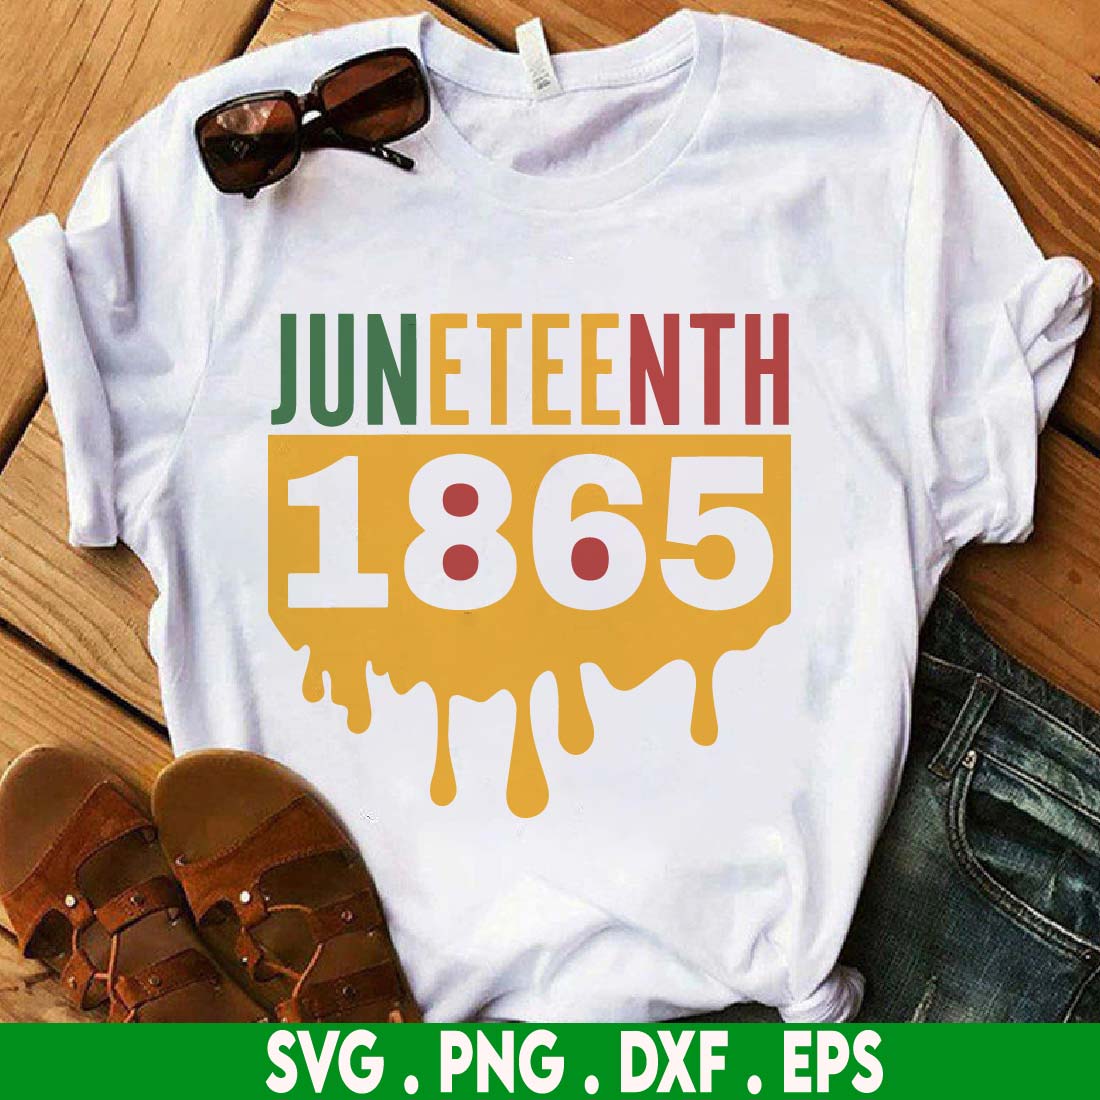 Juneteen PNG Design cover image.